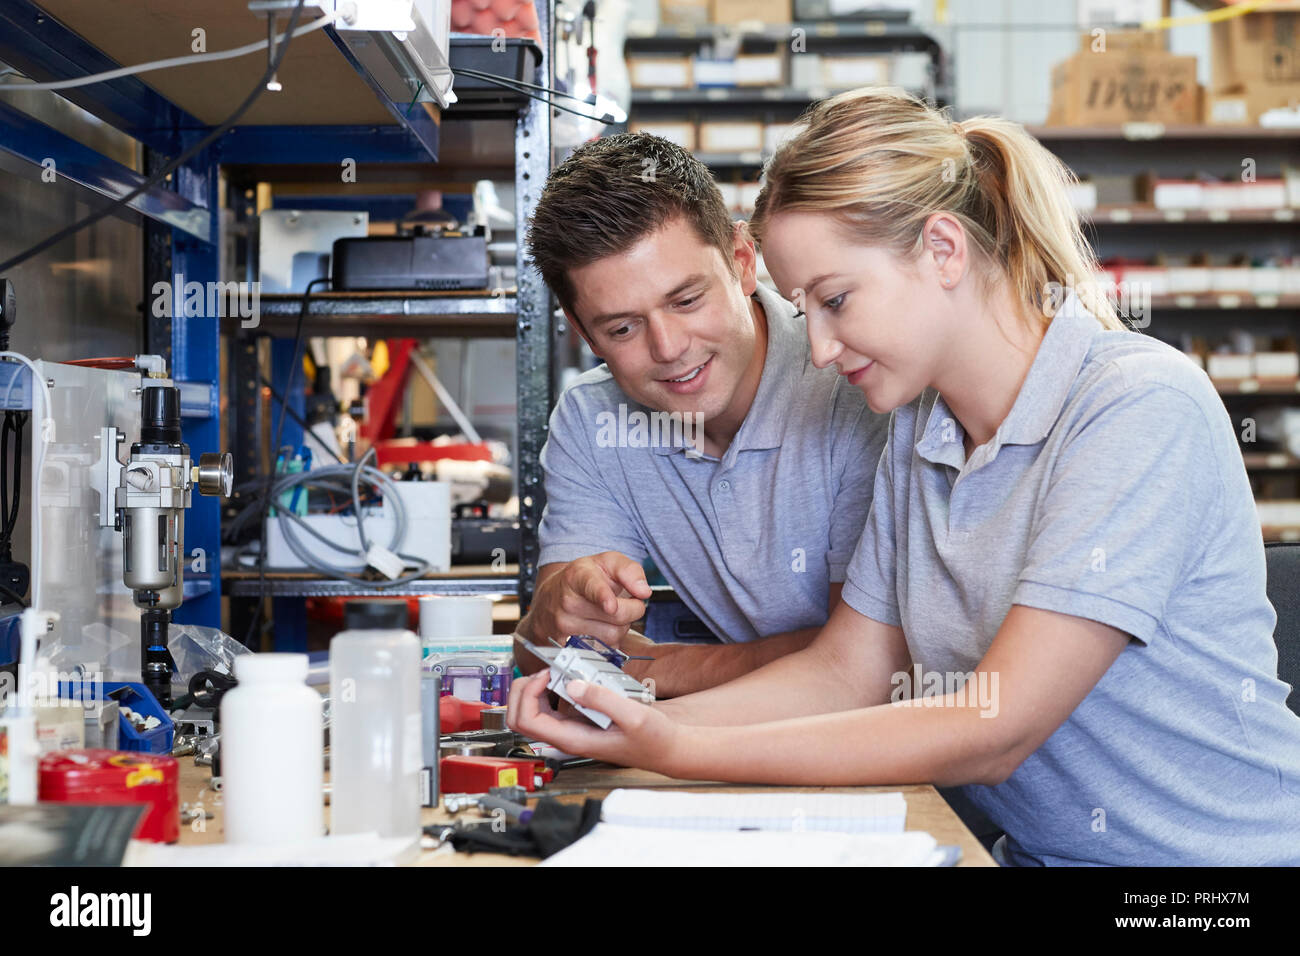 Engineer Helping Female Apprentice In Factory To Measure Component Using Micrometer Stock Photo